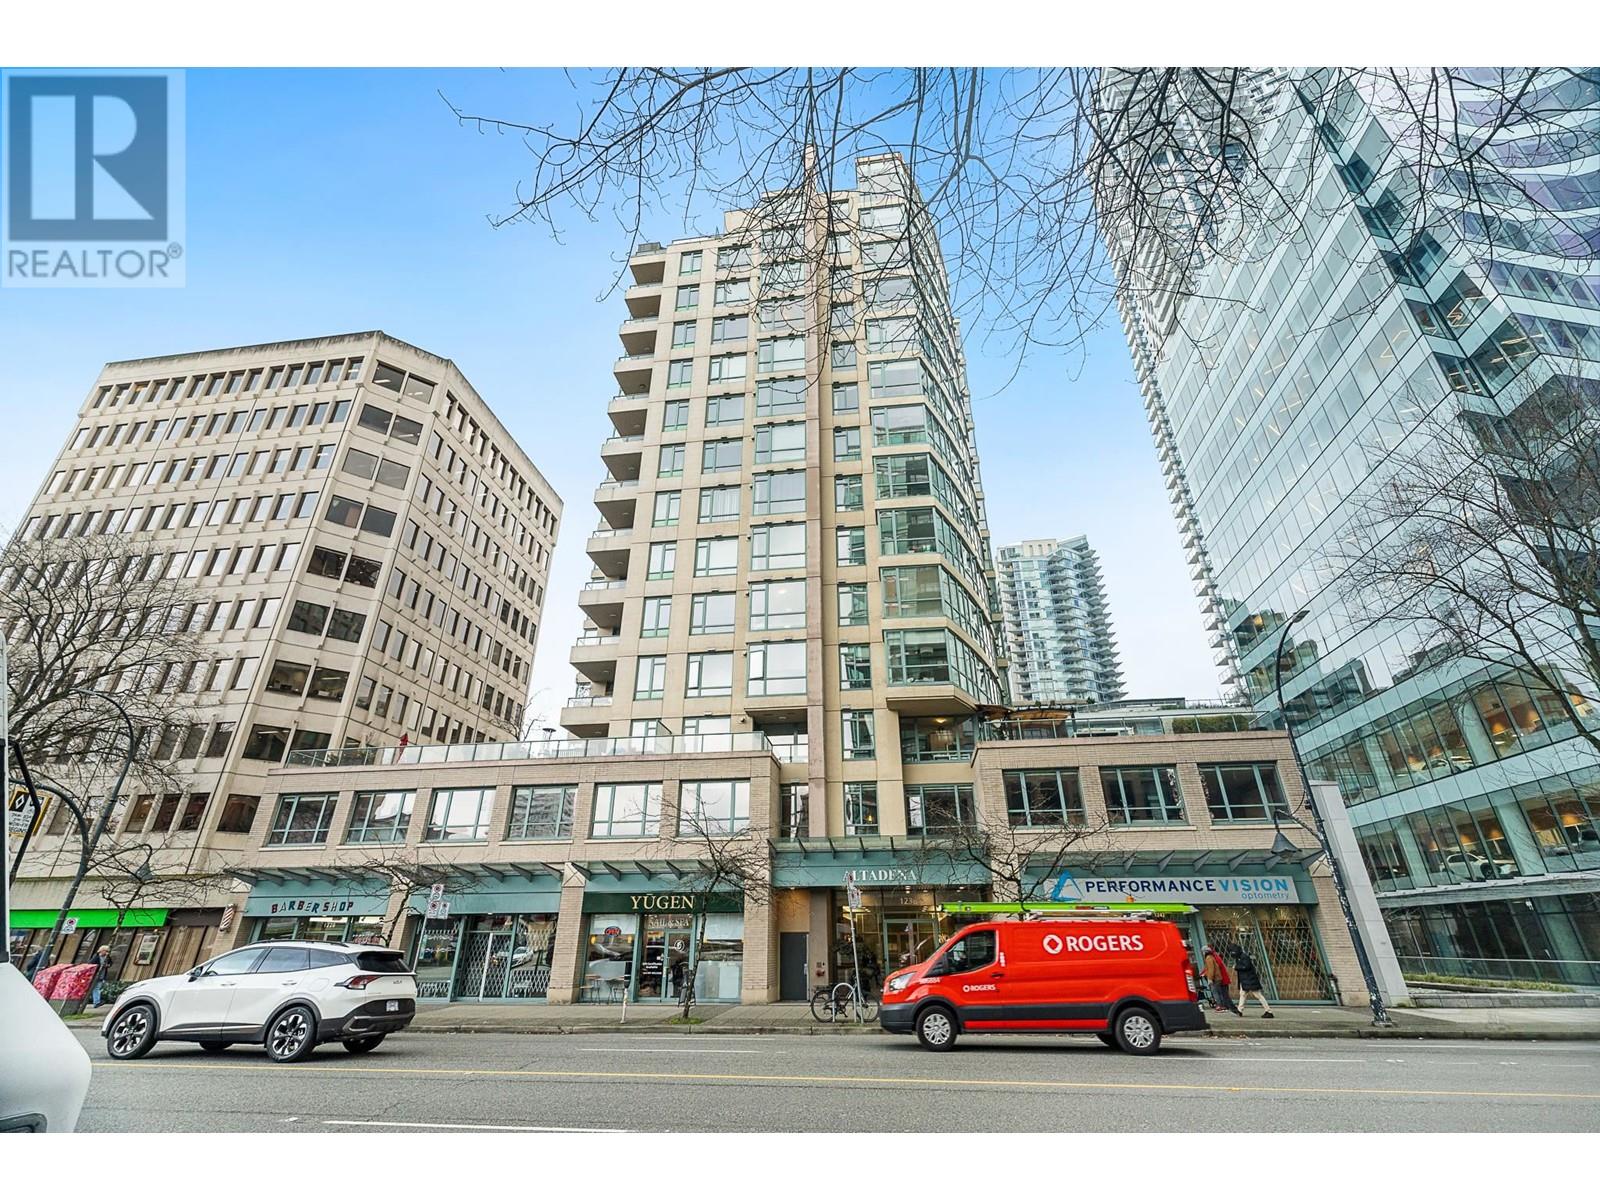 1105 - 480 ROBSON STREET, Vancouver, Terminated, R2785263